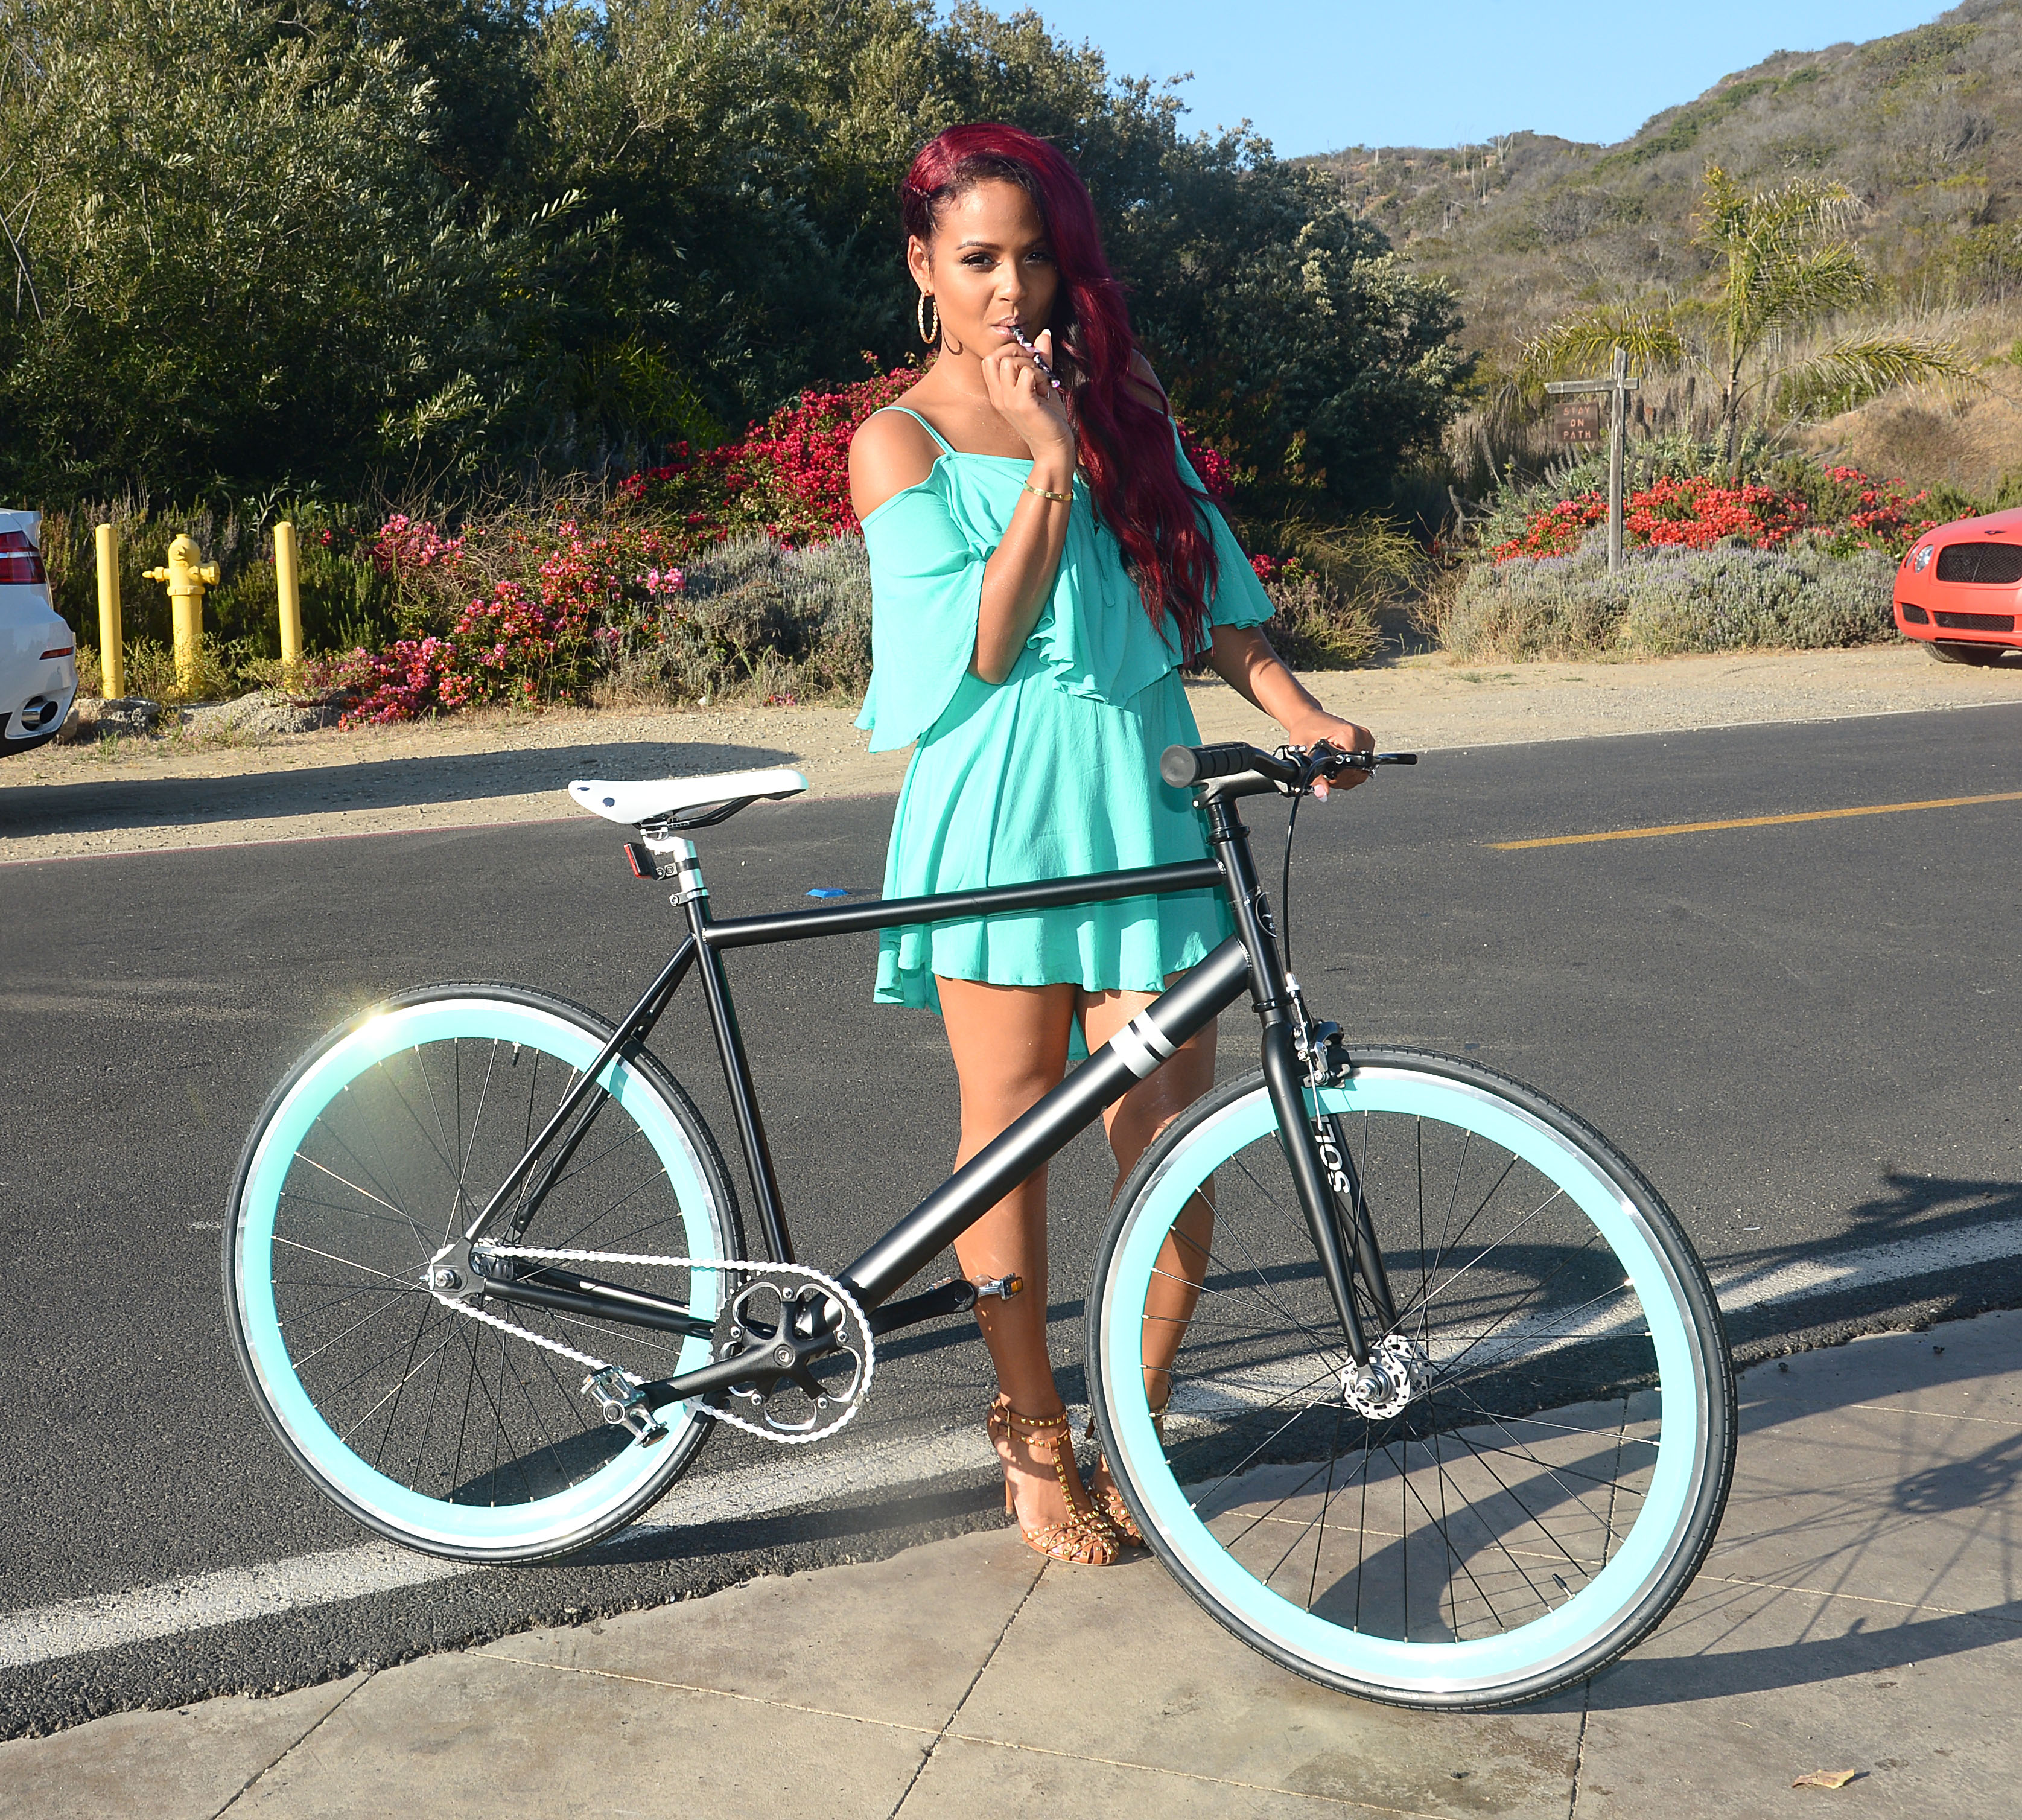 Christina Milian Rides a Sole Bicycle at the Revolve Beach House on August 3, 2013, Los Angeles, California USA. Photo Credit Brian Lindensmith. Copyright All Access Photo Agency.